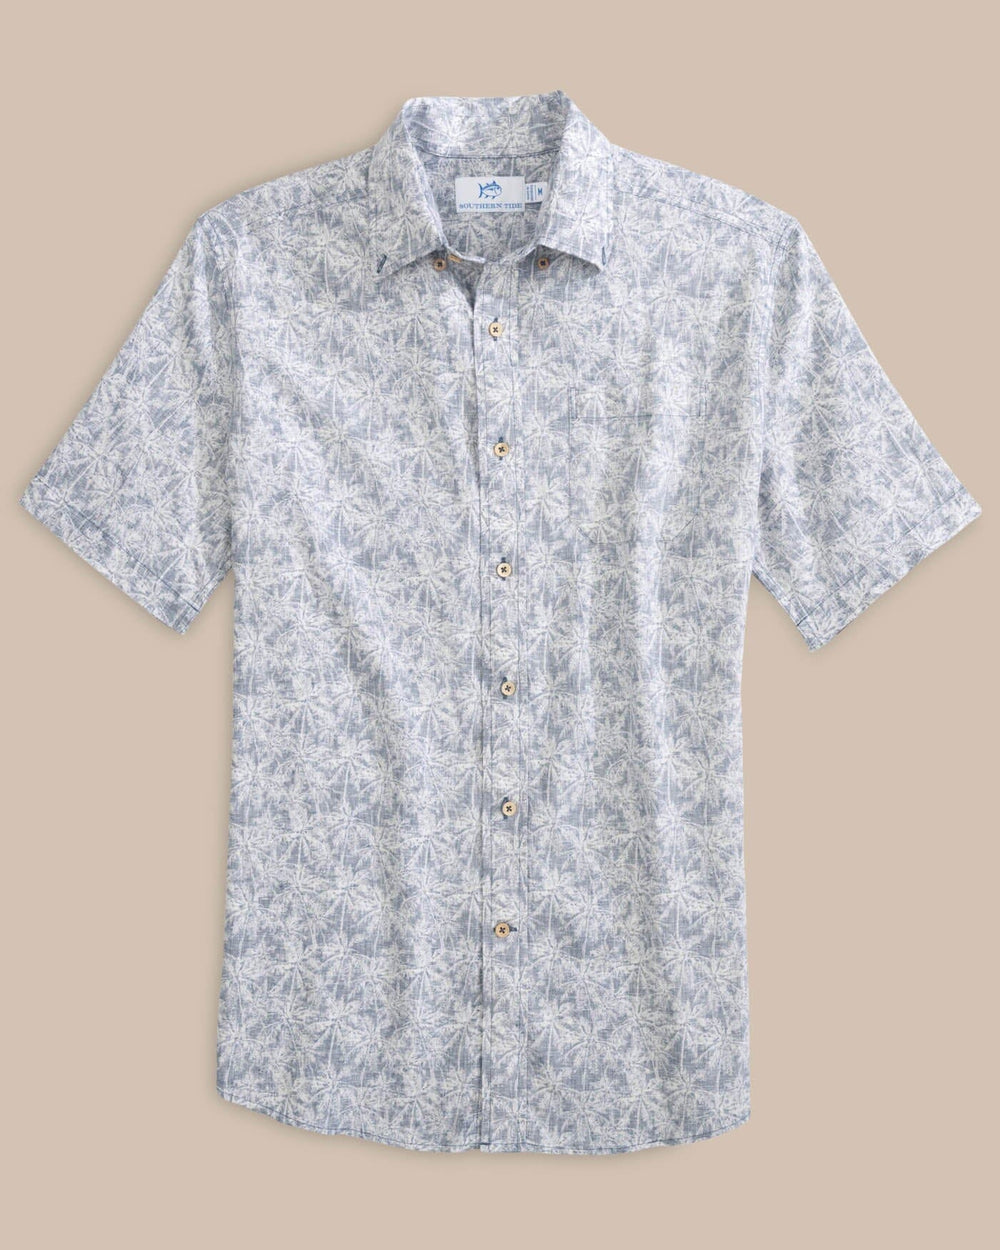 The front view of the Southern Tide Linen Rayon Keep Palm and Carry On Print Sport Shirt by Southern Tide - Aged Denim